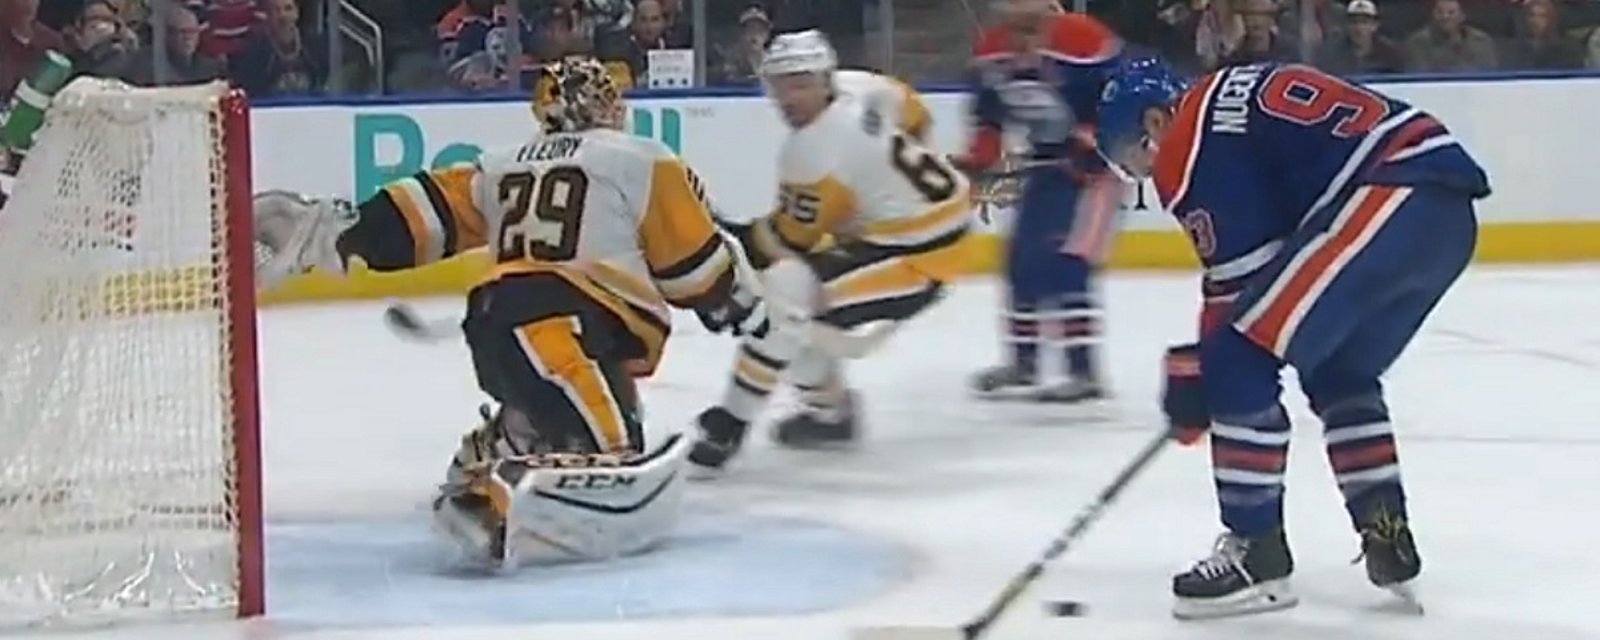 Marc-Andre Fleury makes a mind-boggling save in overtime on Friday night.